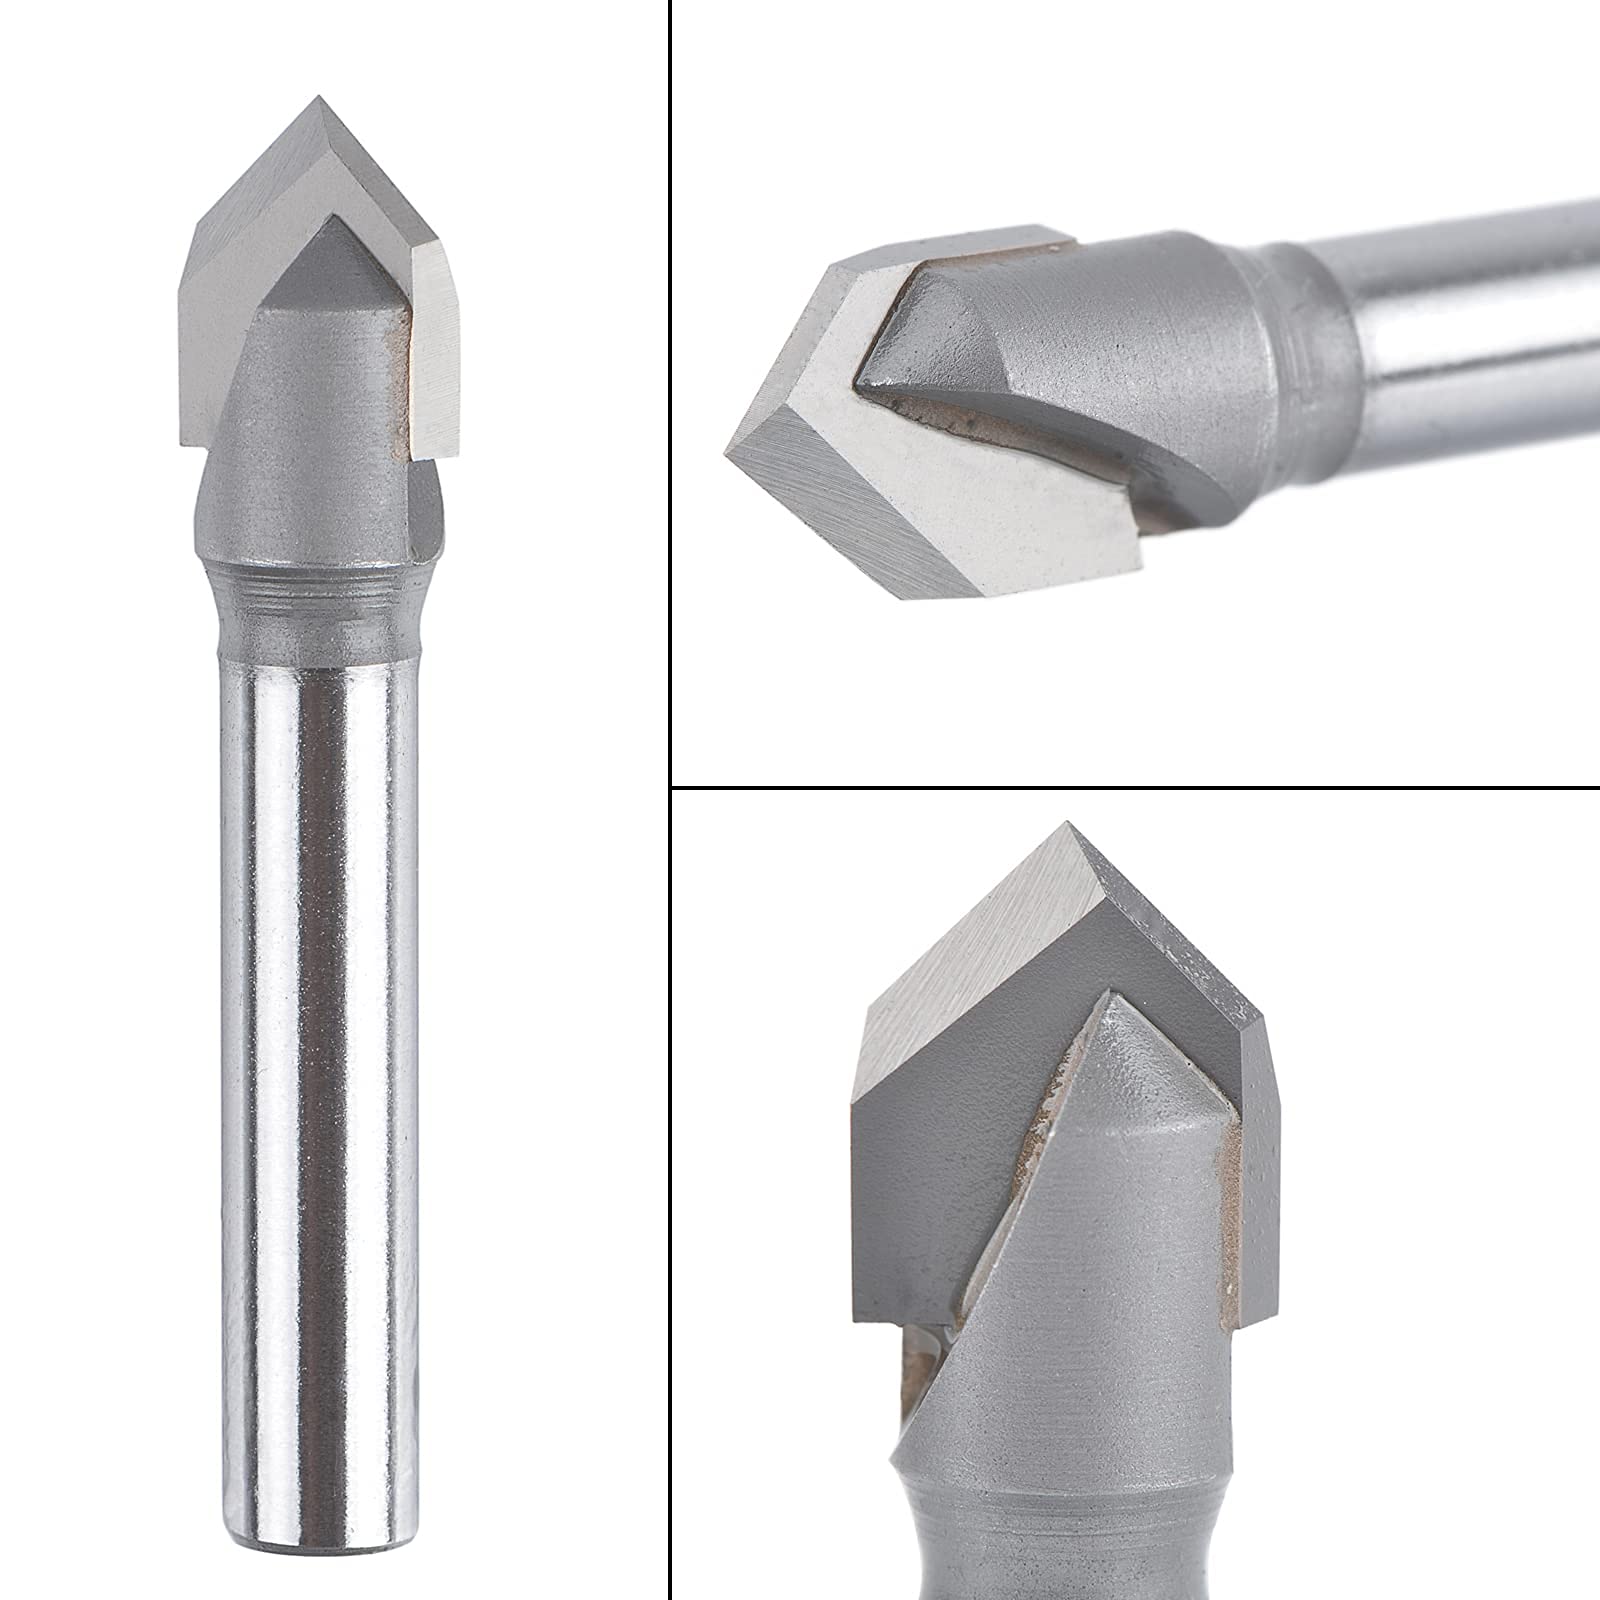 SpeTool V-Groove Carbide Router Bit 90 Deg Chamfer Bits for CNC Woodword 1/2in Cutting Diameter with 1/4in Shank